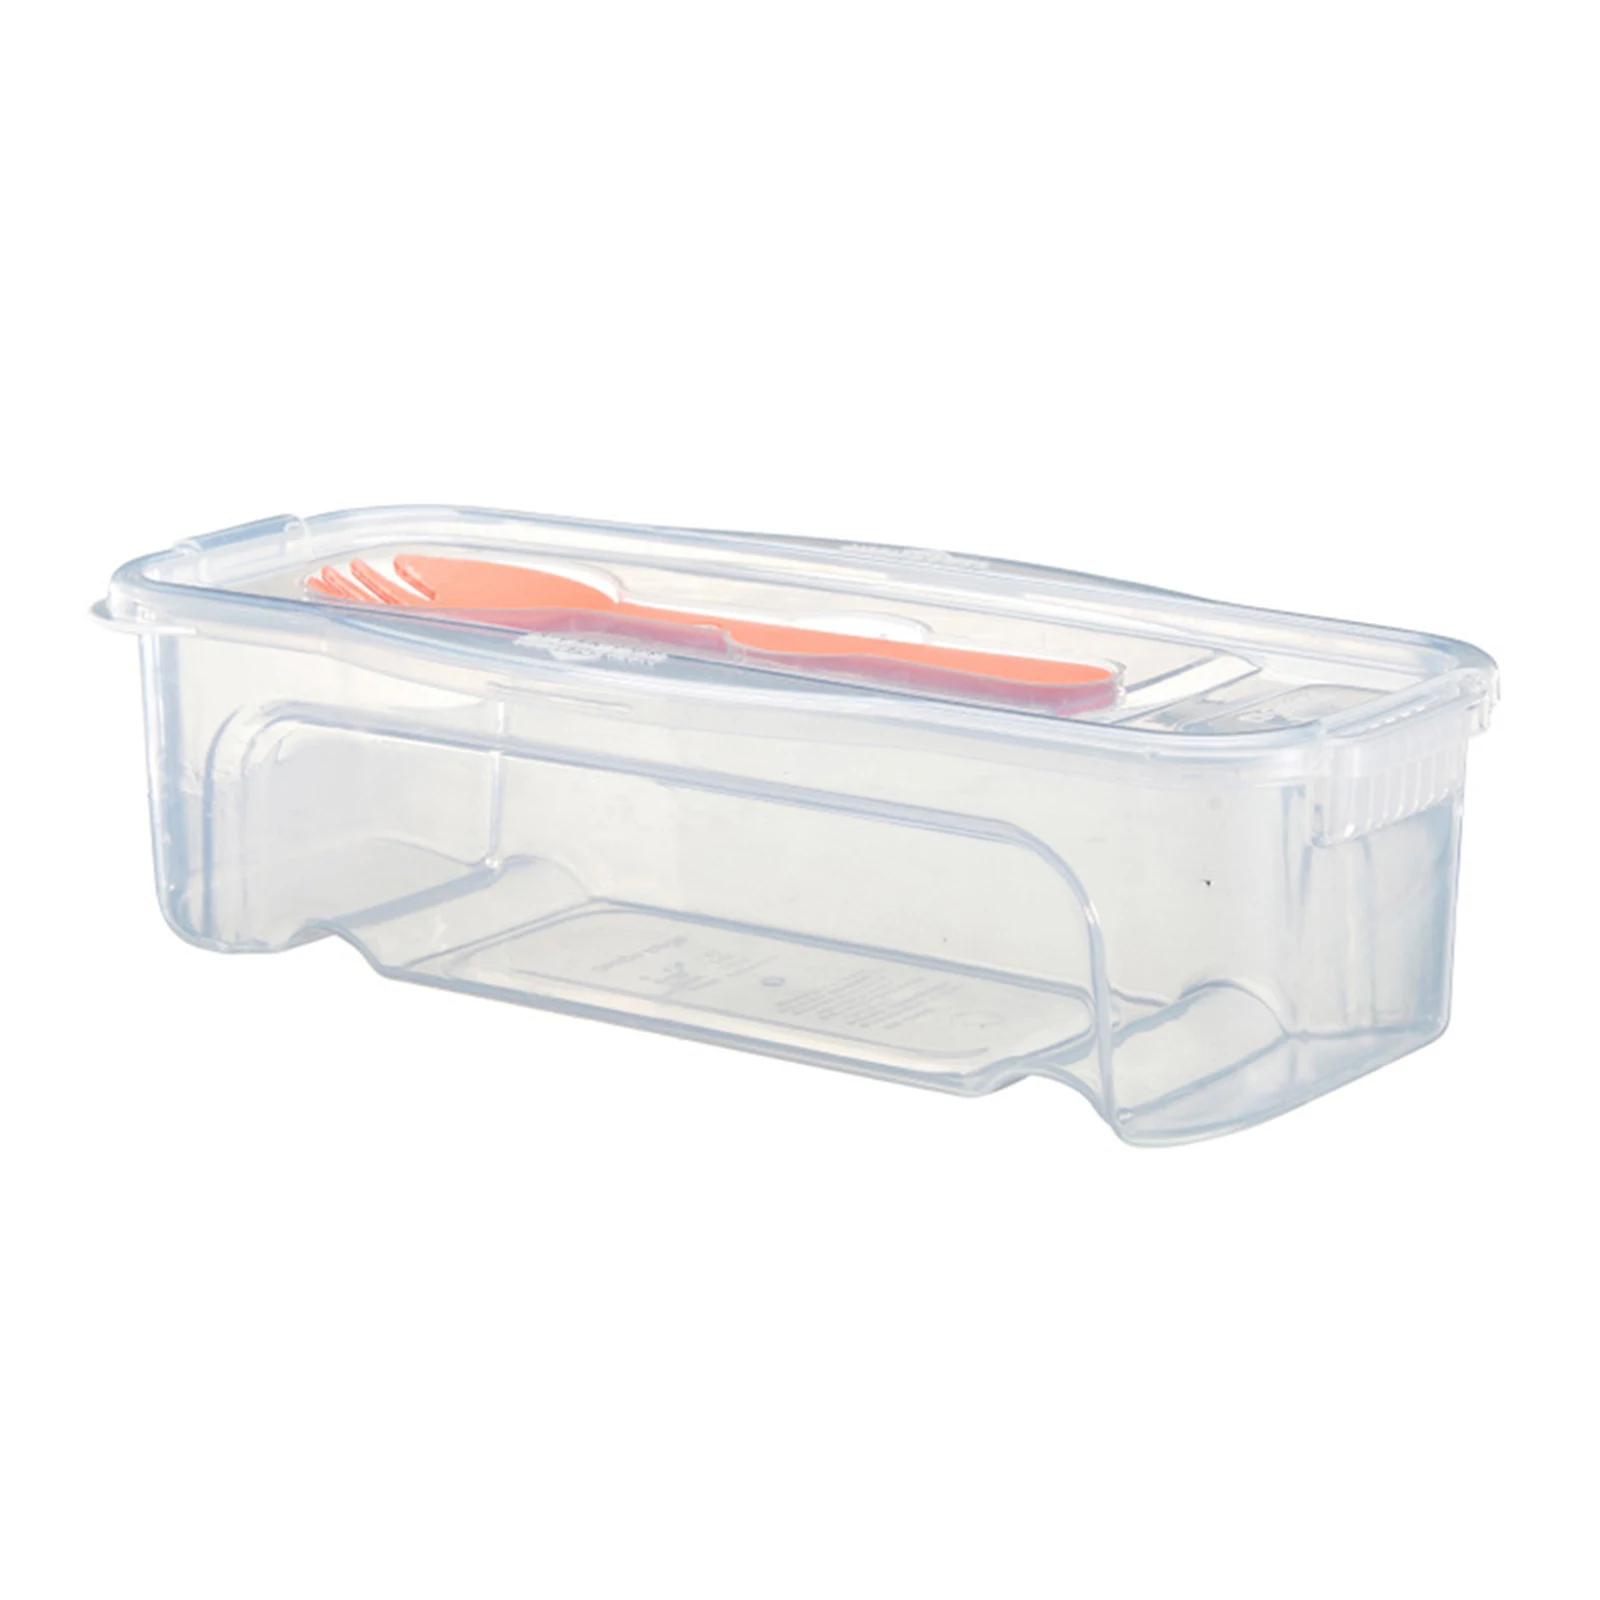 

Noodle Cooking Container Cooking Box Pasta Container Transparent 13.3x28.5x13cm 1pcs Cooking Tool Multi Purpose